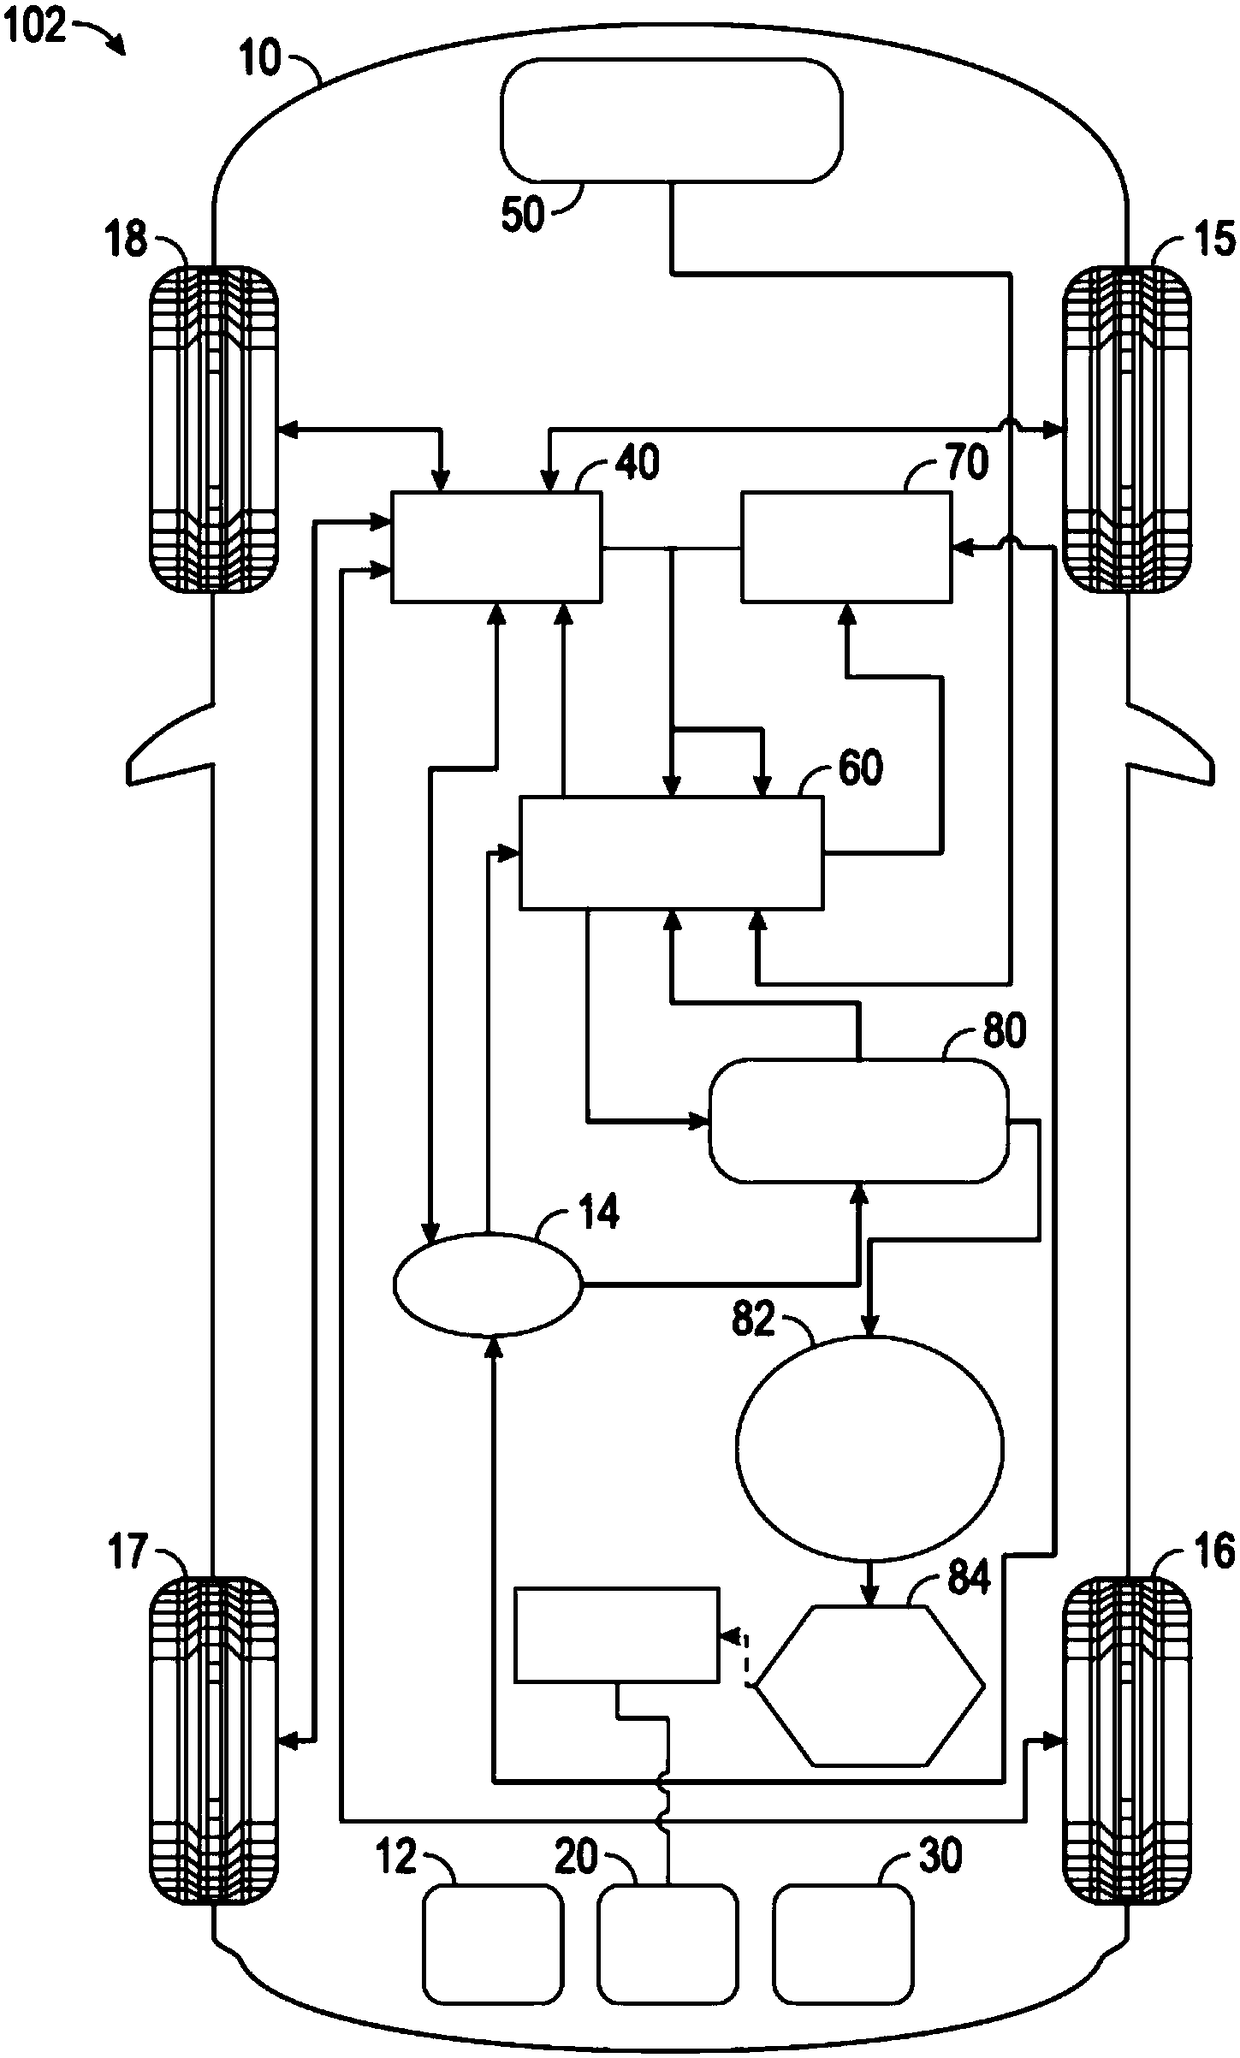 Methods and systems of actuating a clutch of a manual transmission during autonomous braking